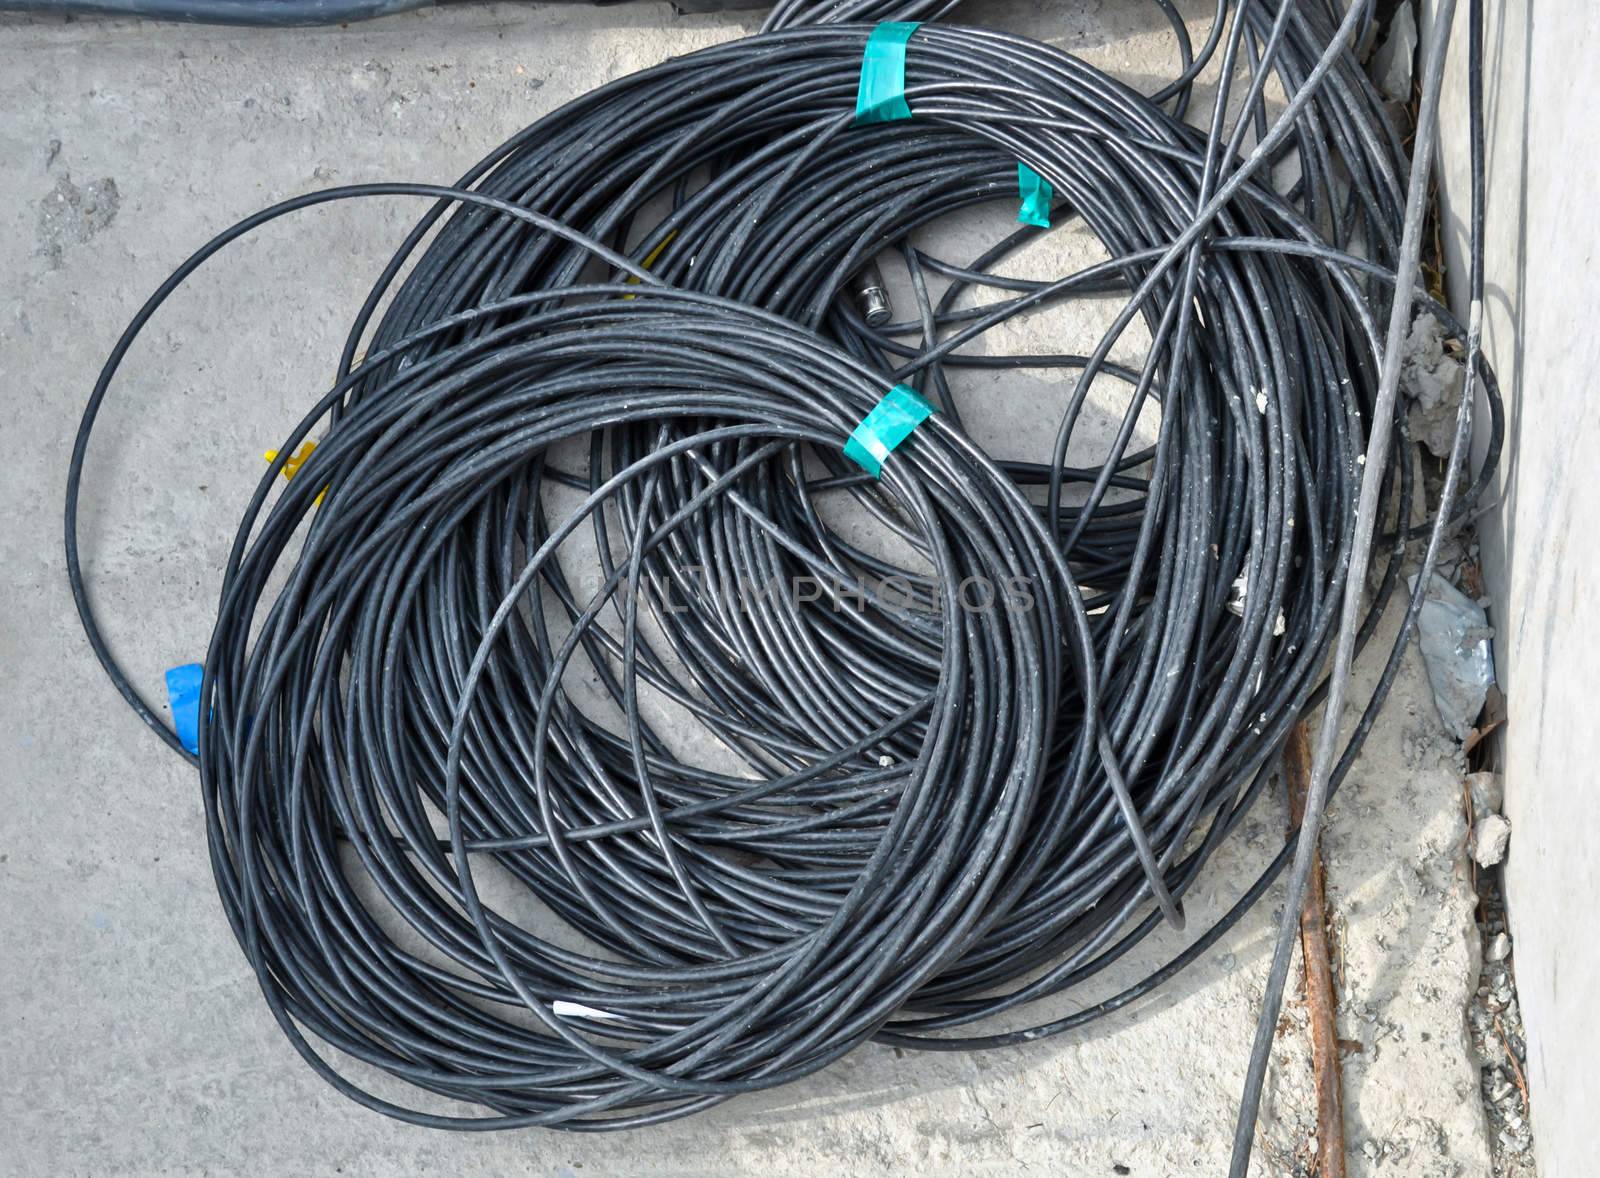 the coil of black electrical cable